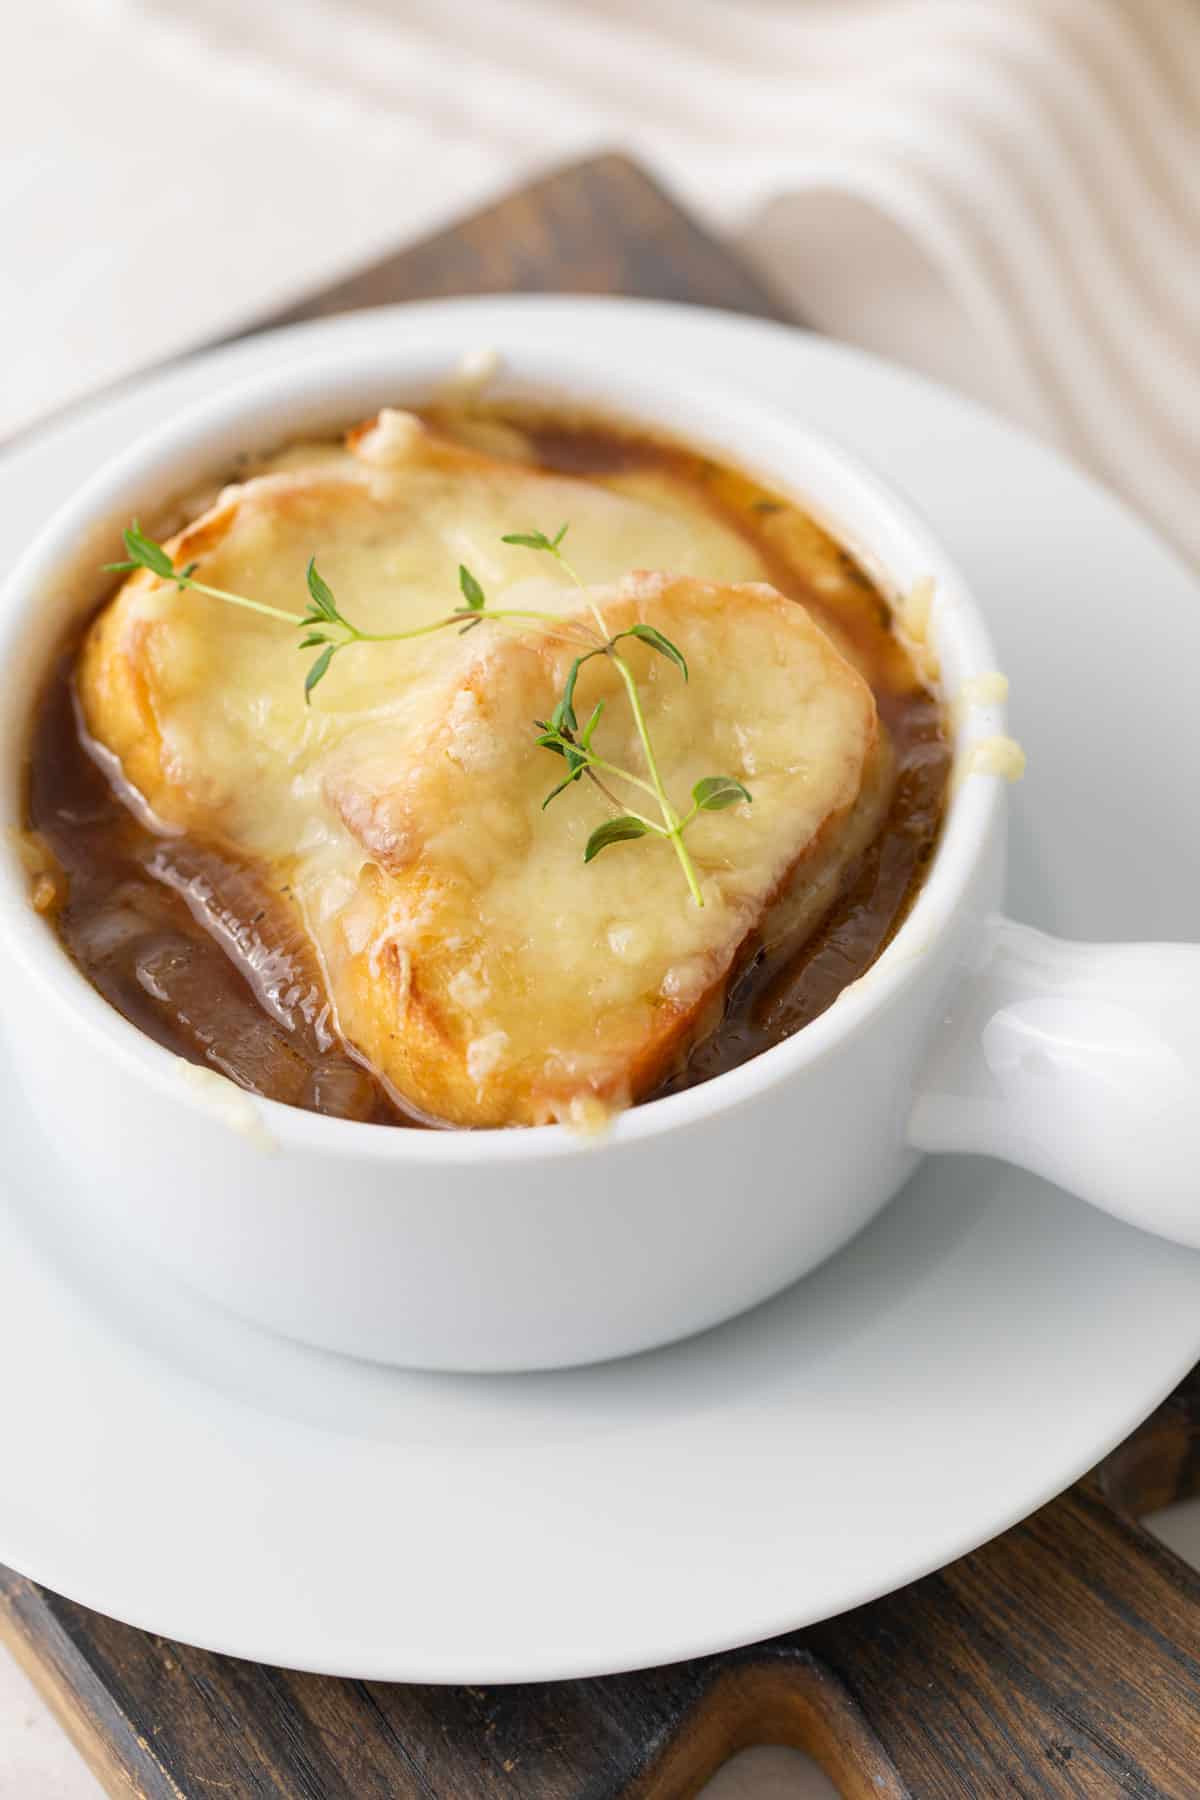 Angled view of a bowl of French onion soup garnished with a sprig of fresh thyme.